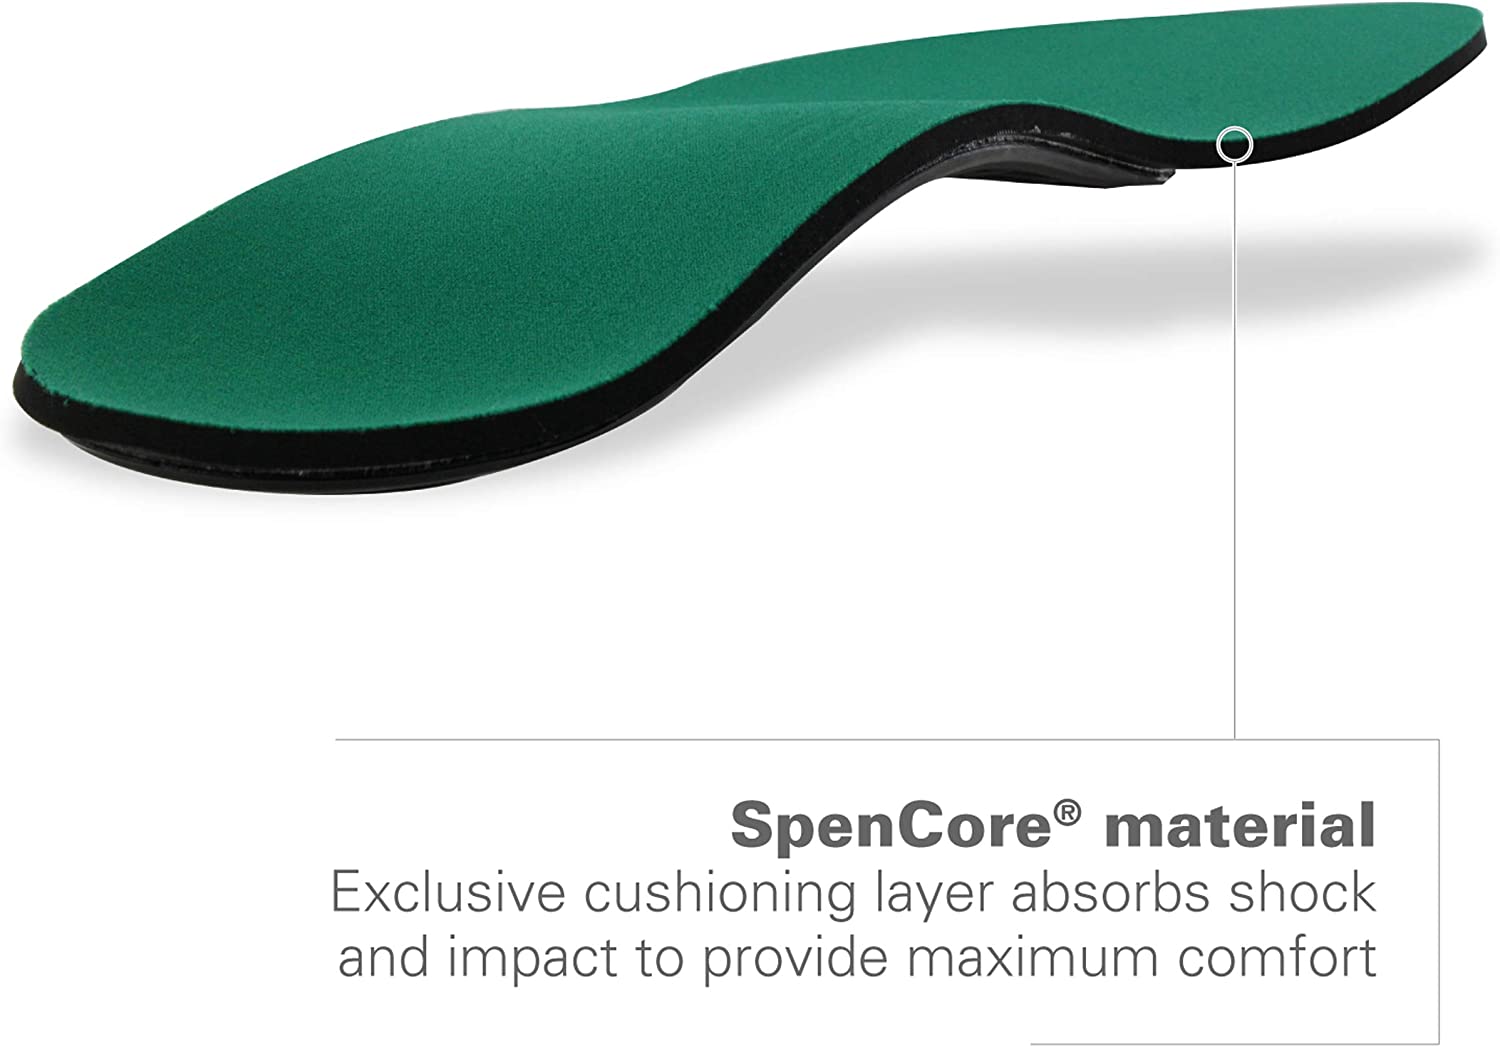 Spenco Rx Orthotic Arch Support Full Length Shoe Insoles